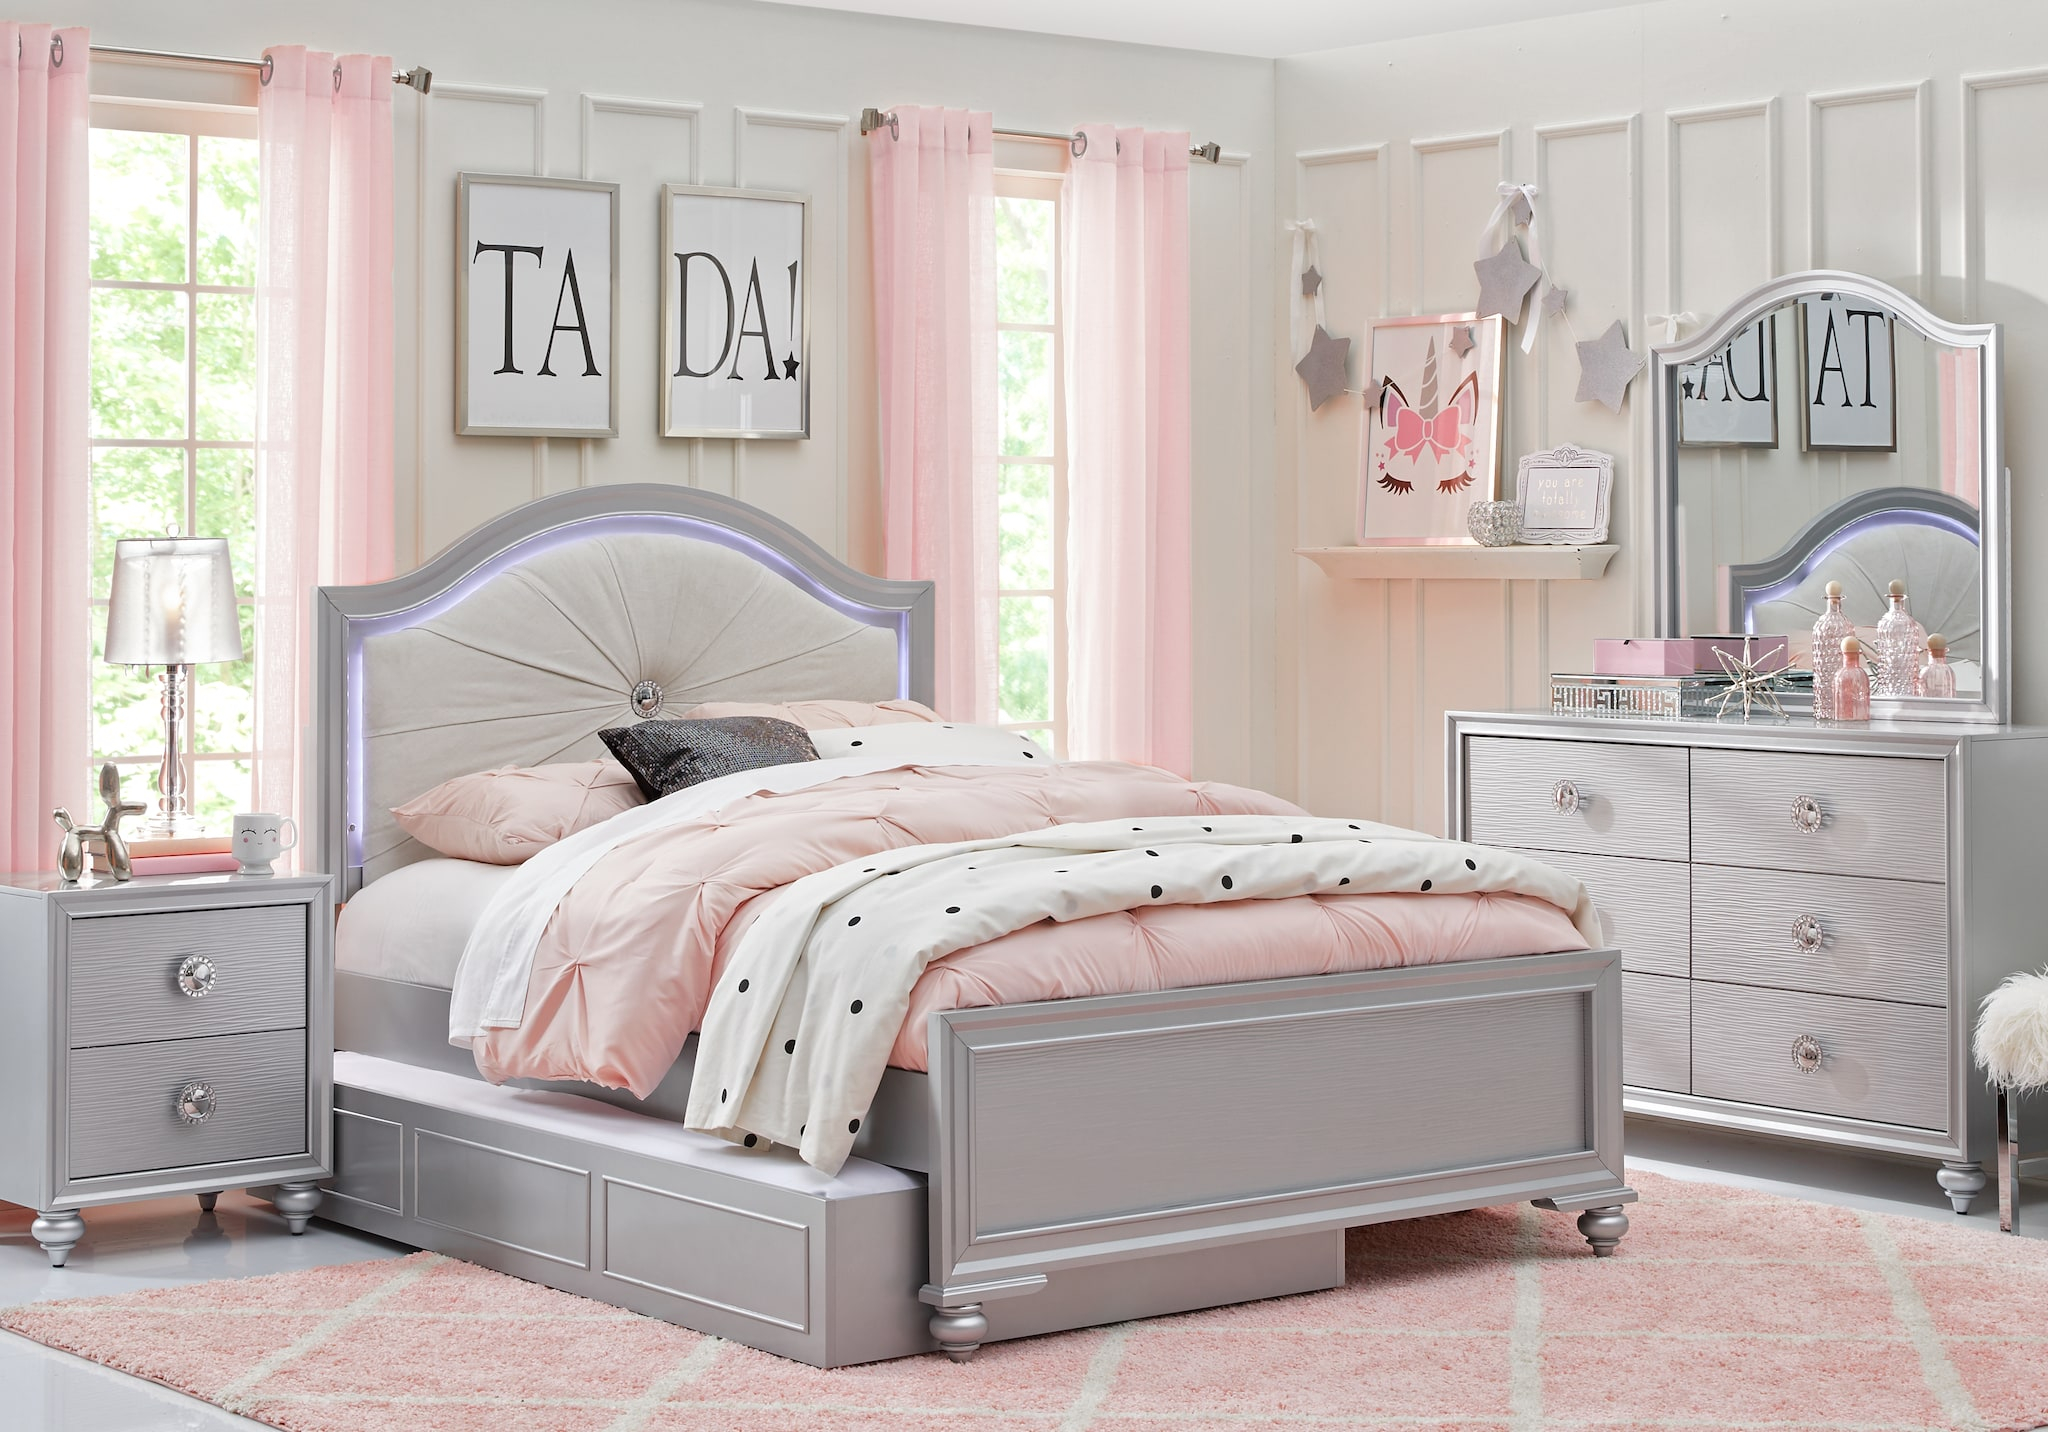 Girls Bedroom Sets Suitable Combine With Bedroom Sets For Girls with regard to dimensions 2048 X 1432